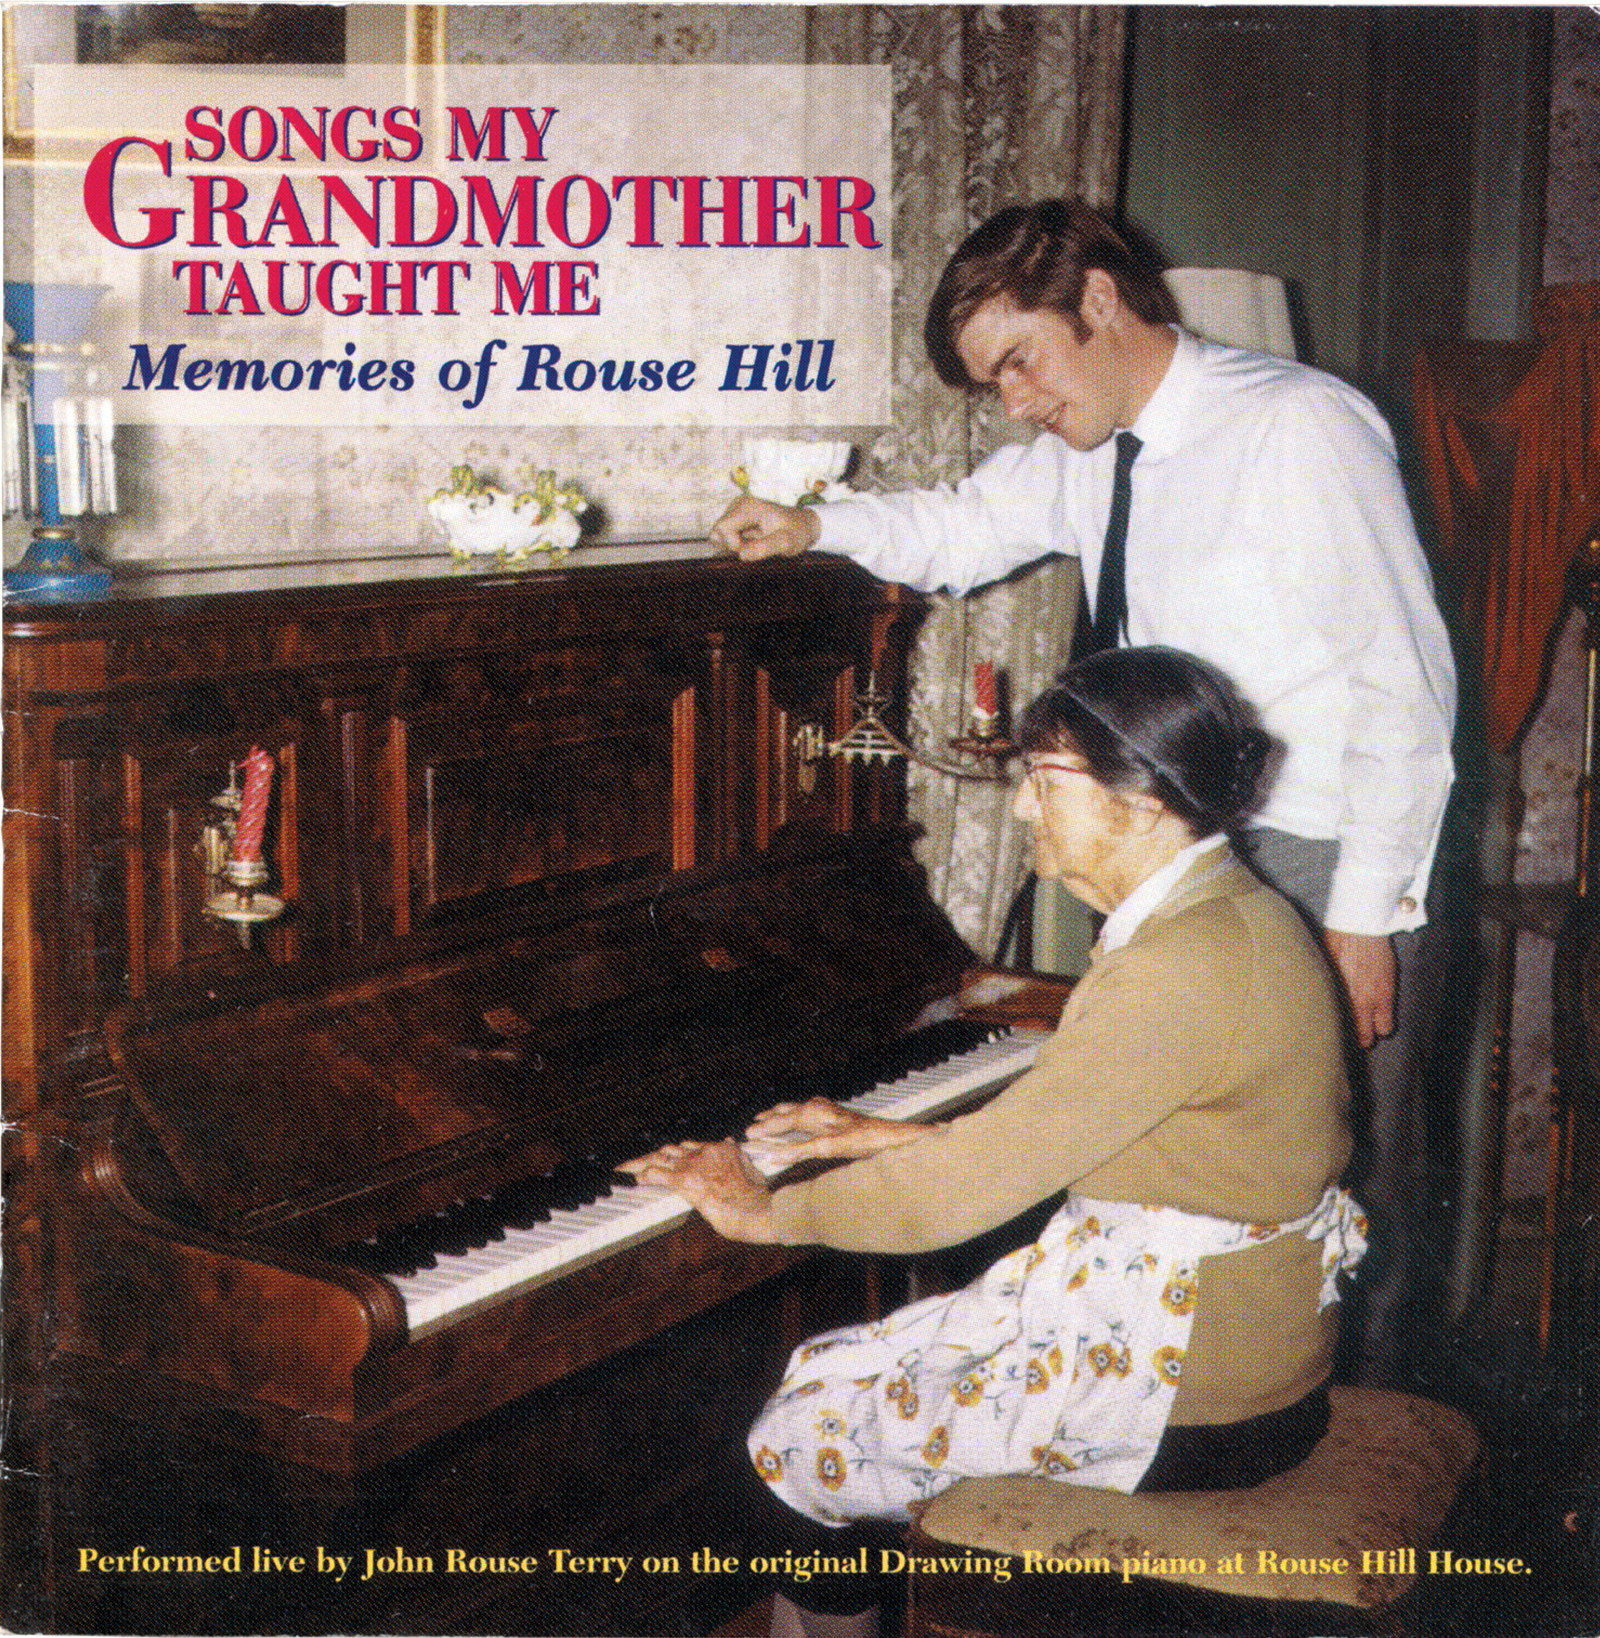 Cover of album with woman seated at piano playing while young man looks on.